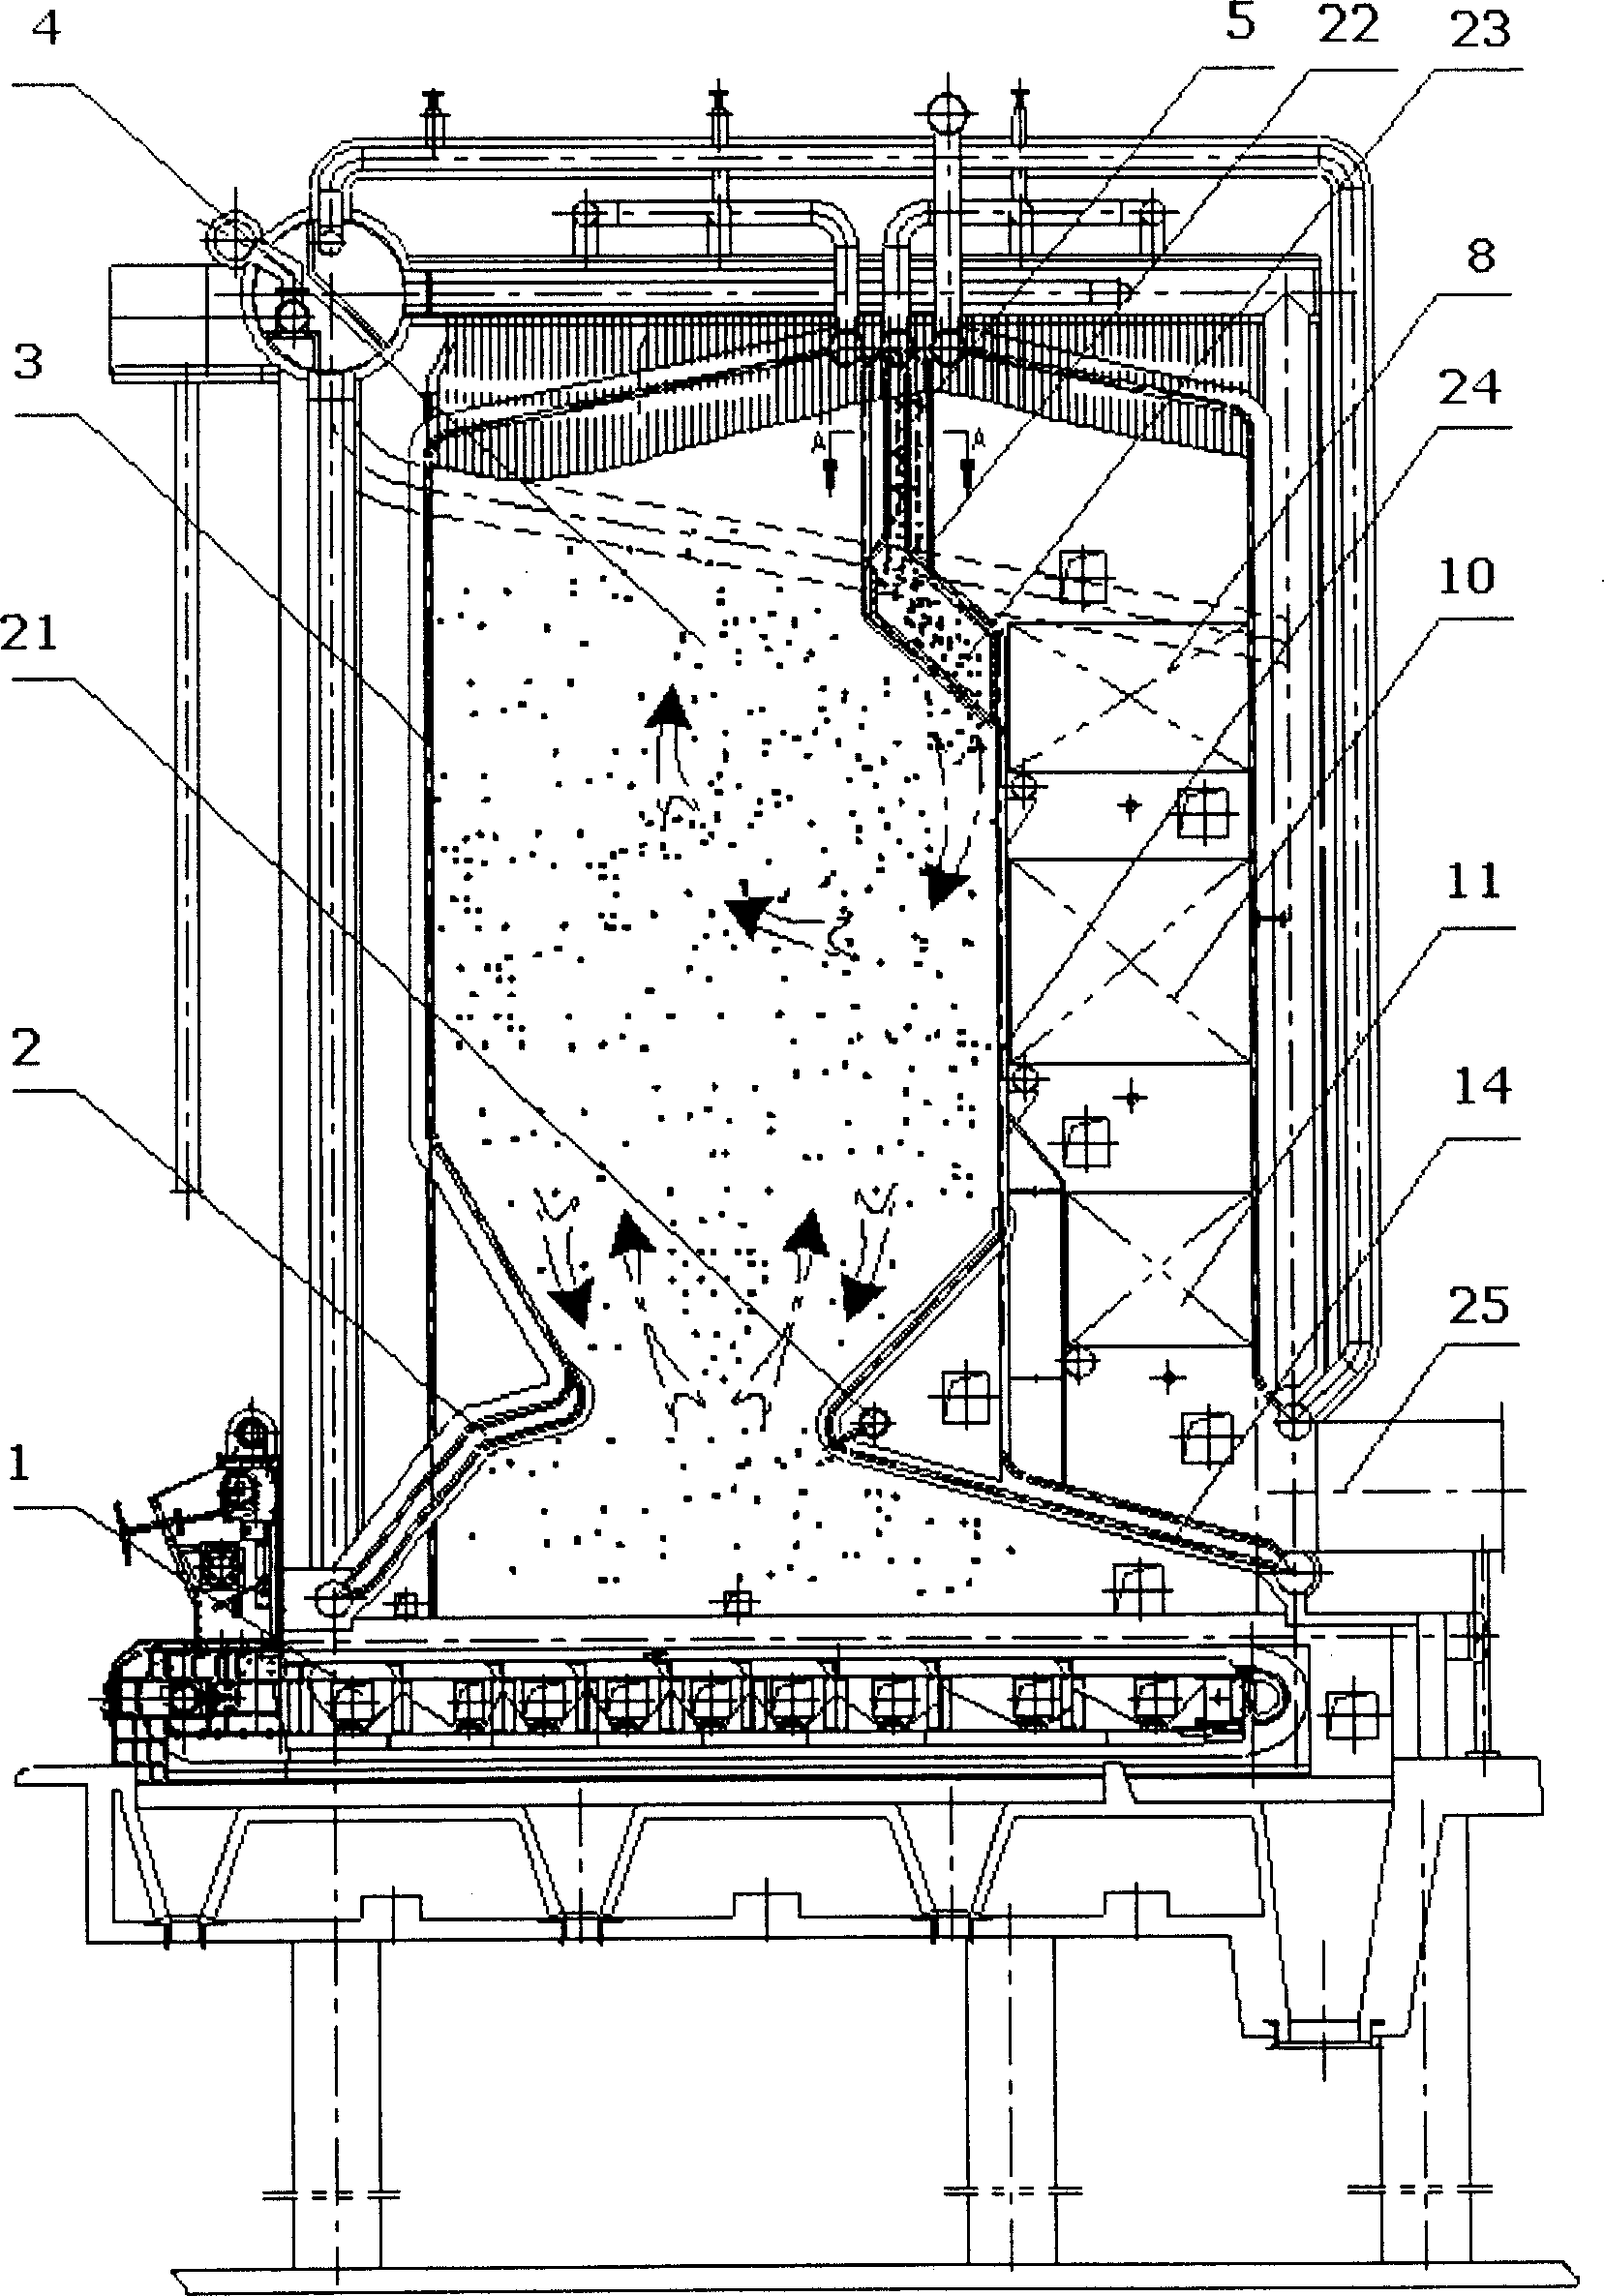 Internally circulating fluidized reburning device for fly ash based on high temperature separation